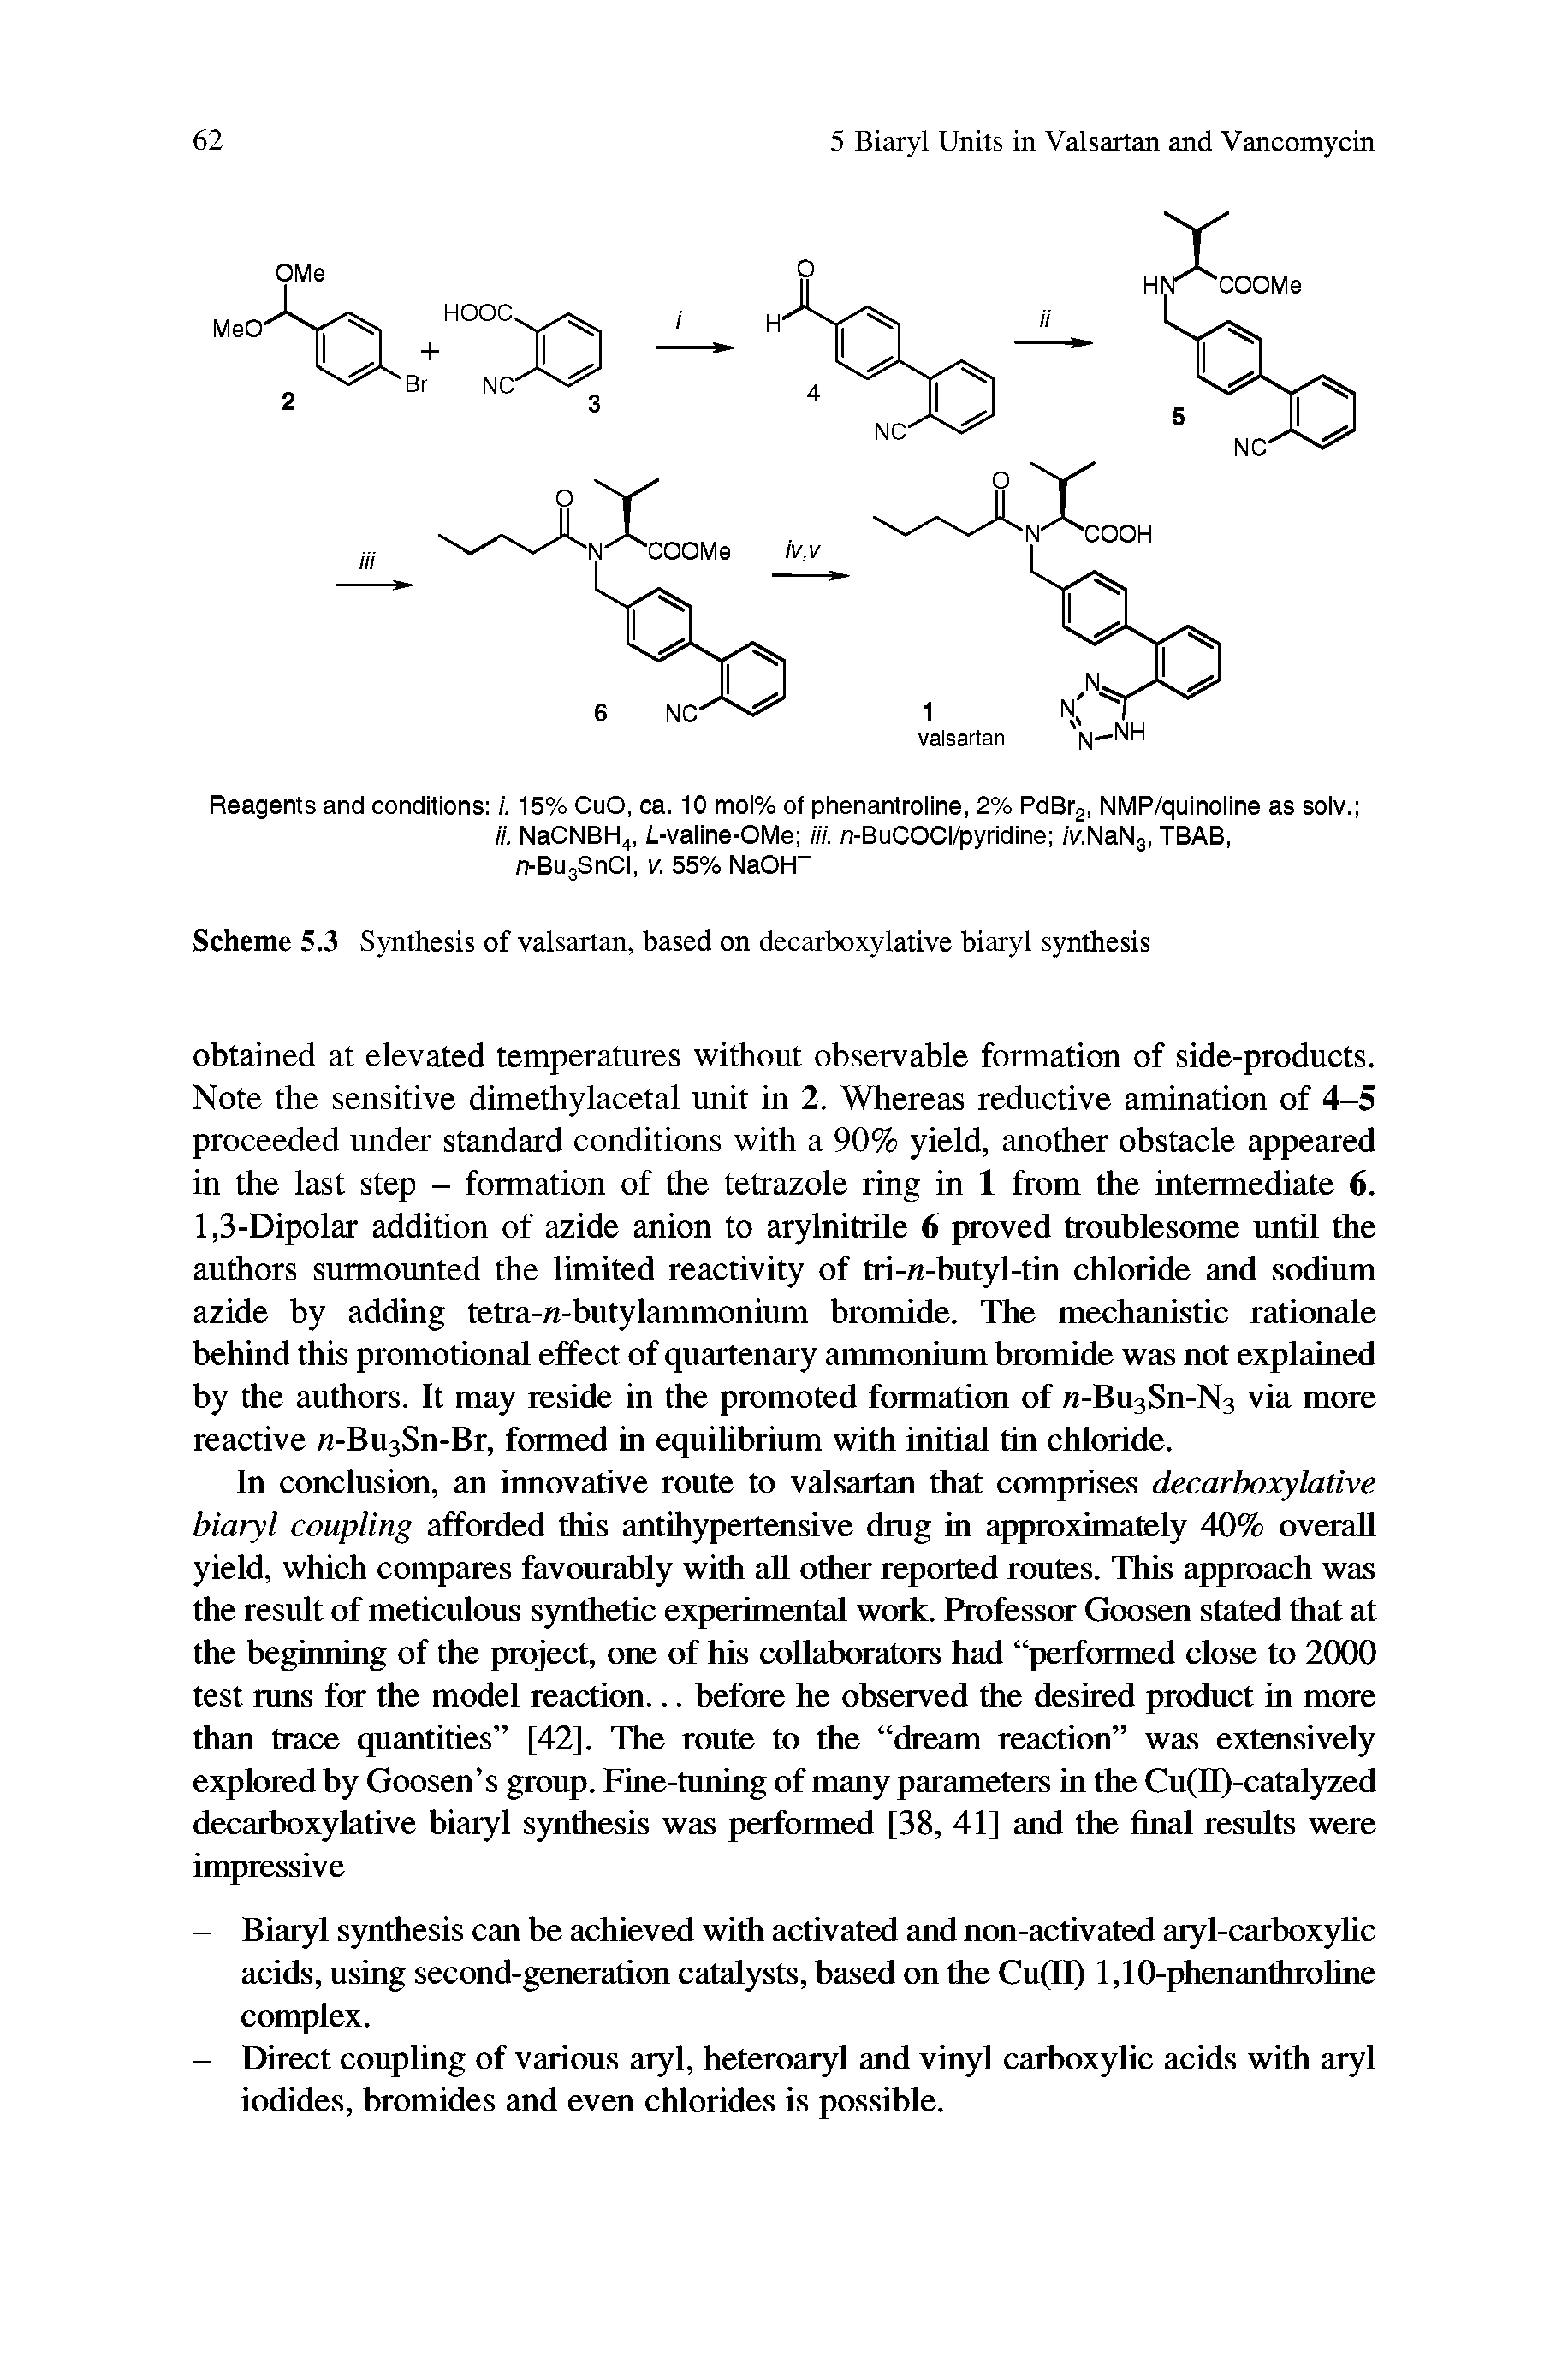 Scheme 5.3 Synthesis of valsartan, based on decarboxylative biaryl synthesis...